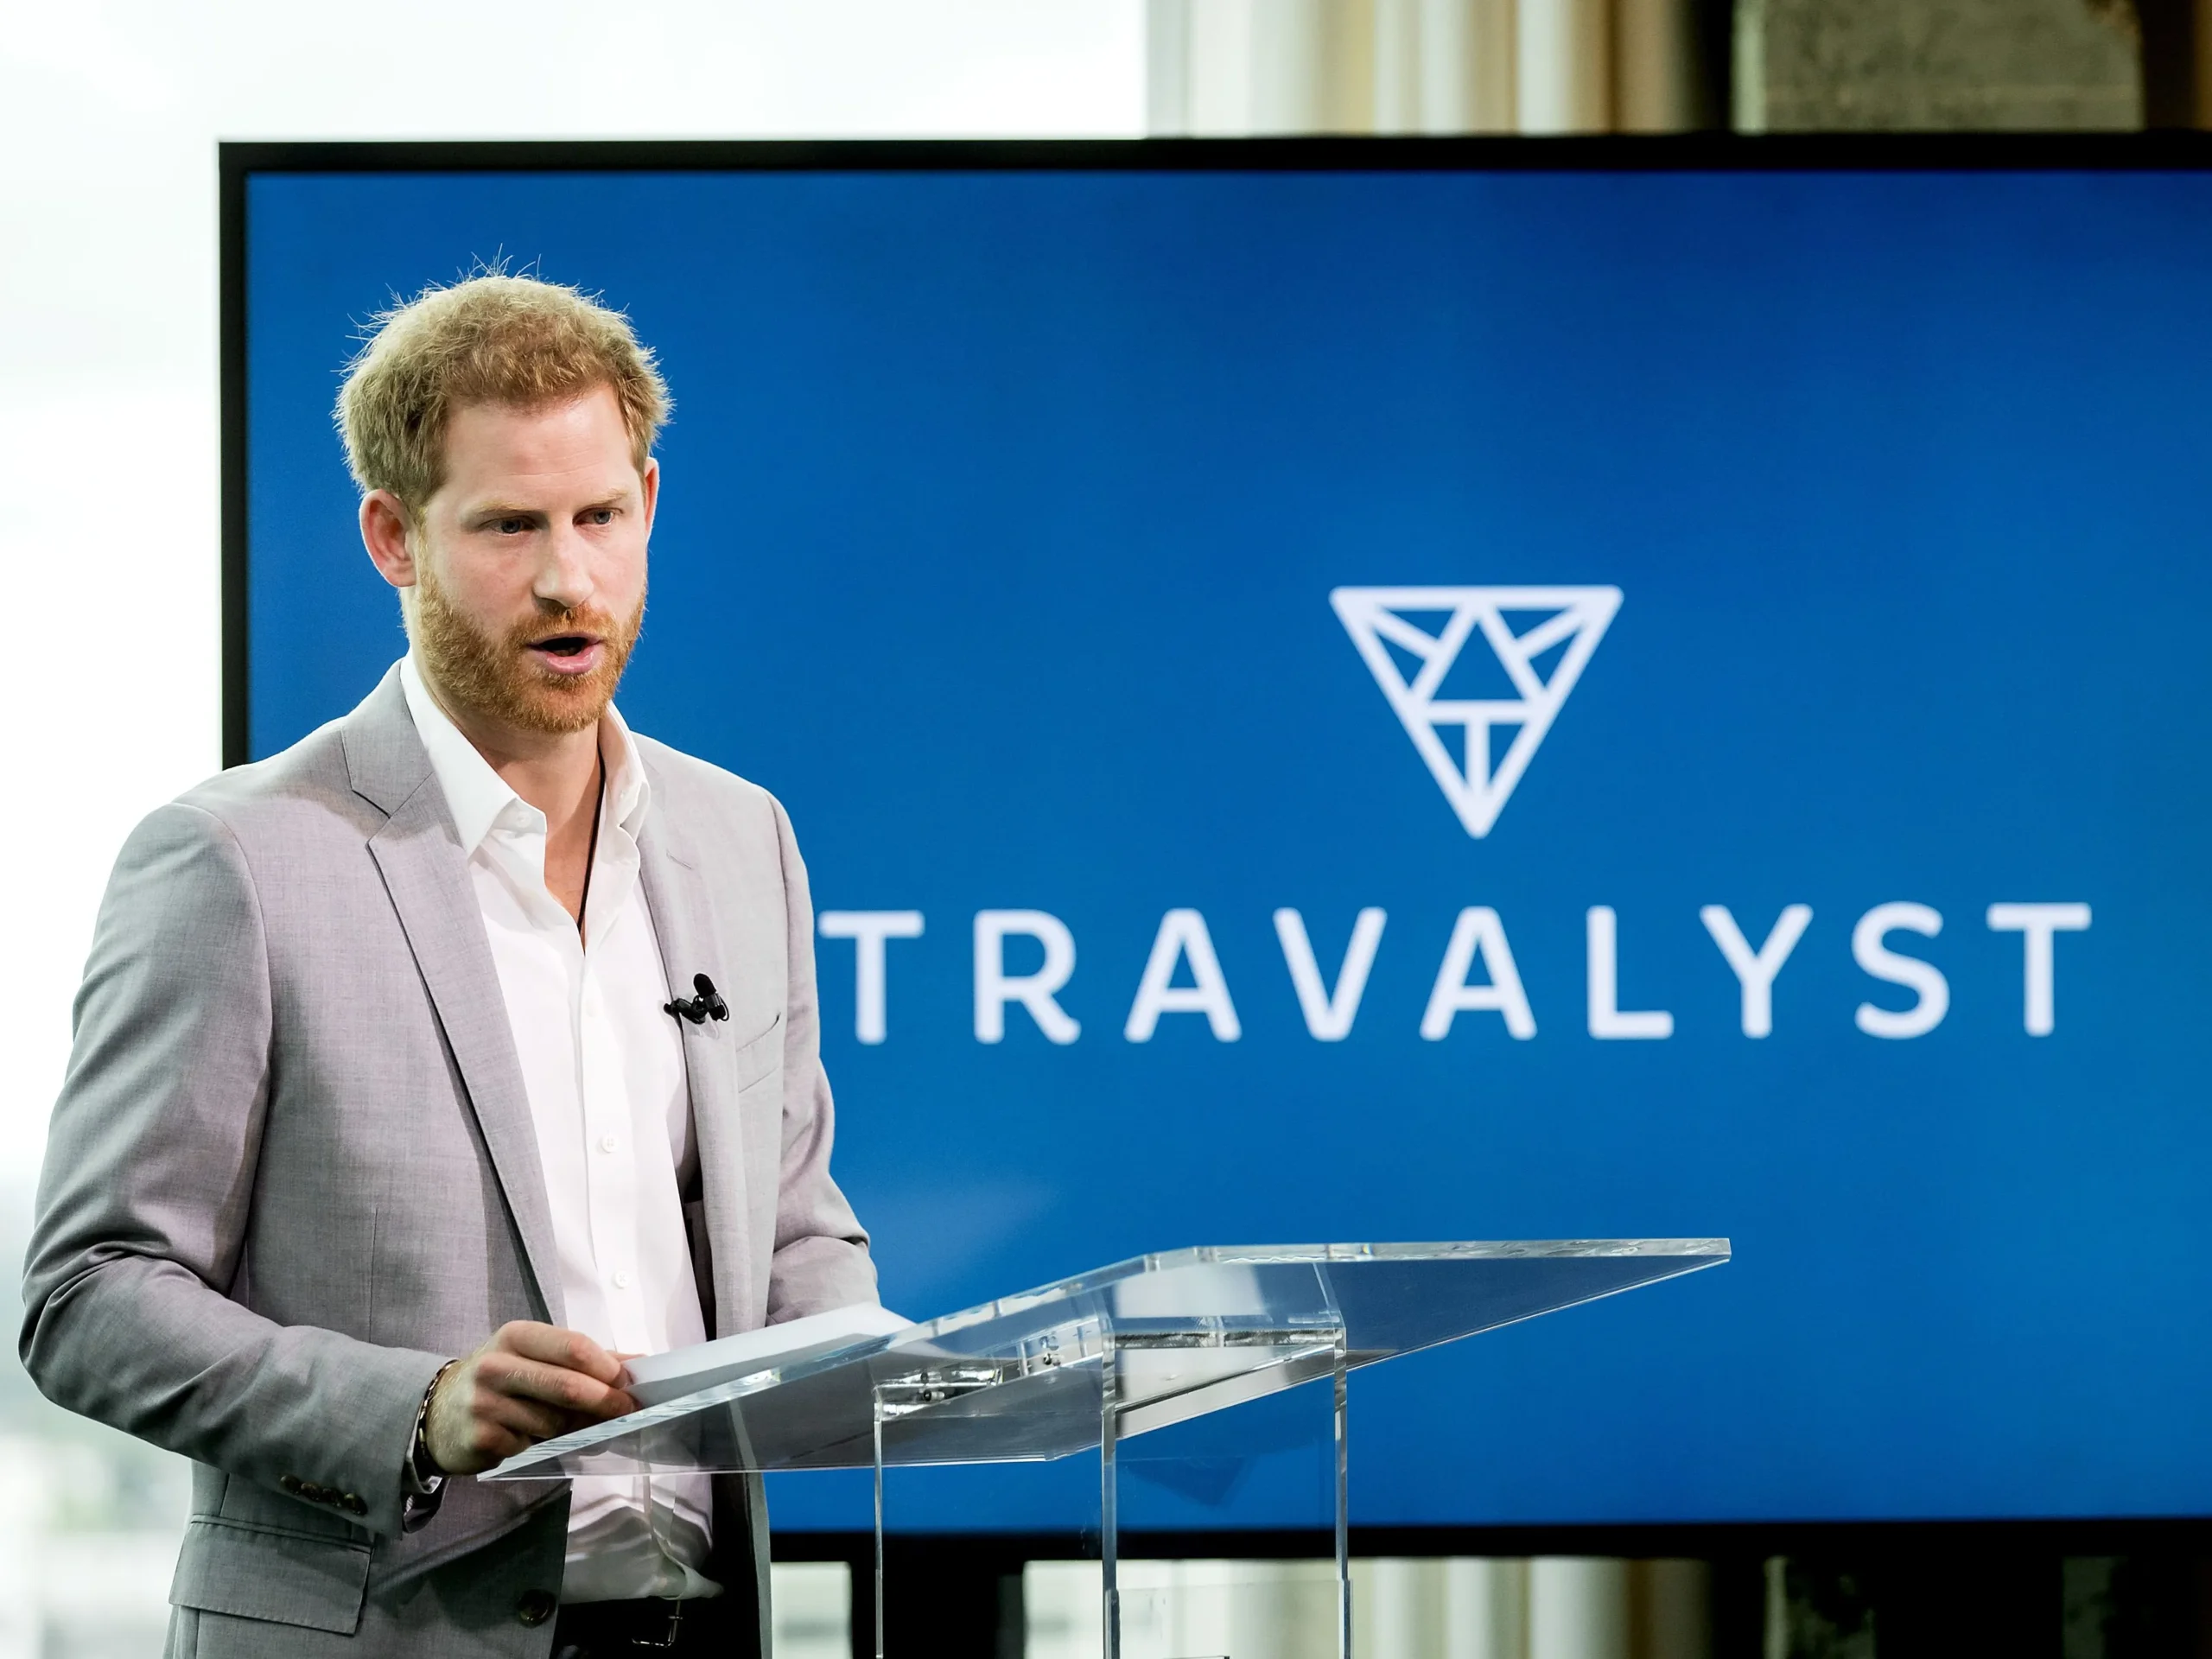 Prince Harry's Environmental Vision: Travalyst's Transformation Sustains His Invaluable Role